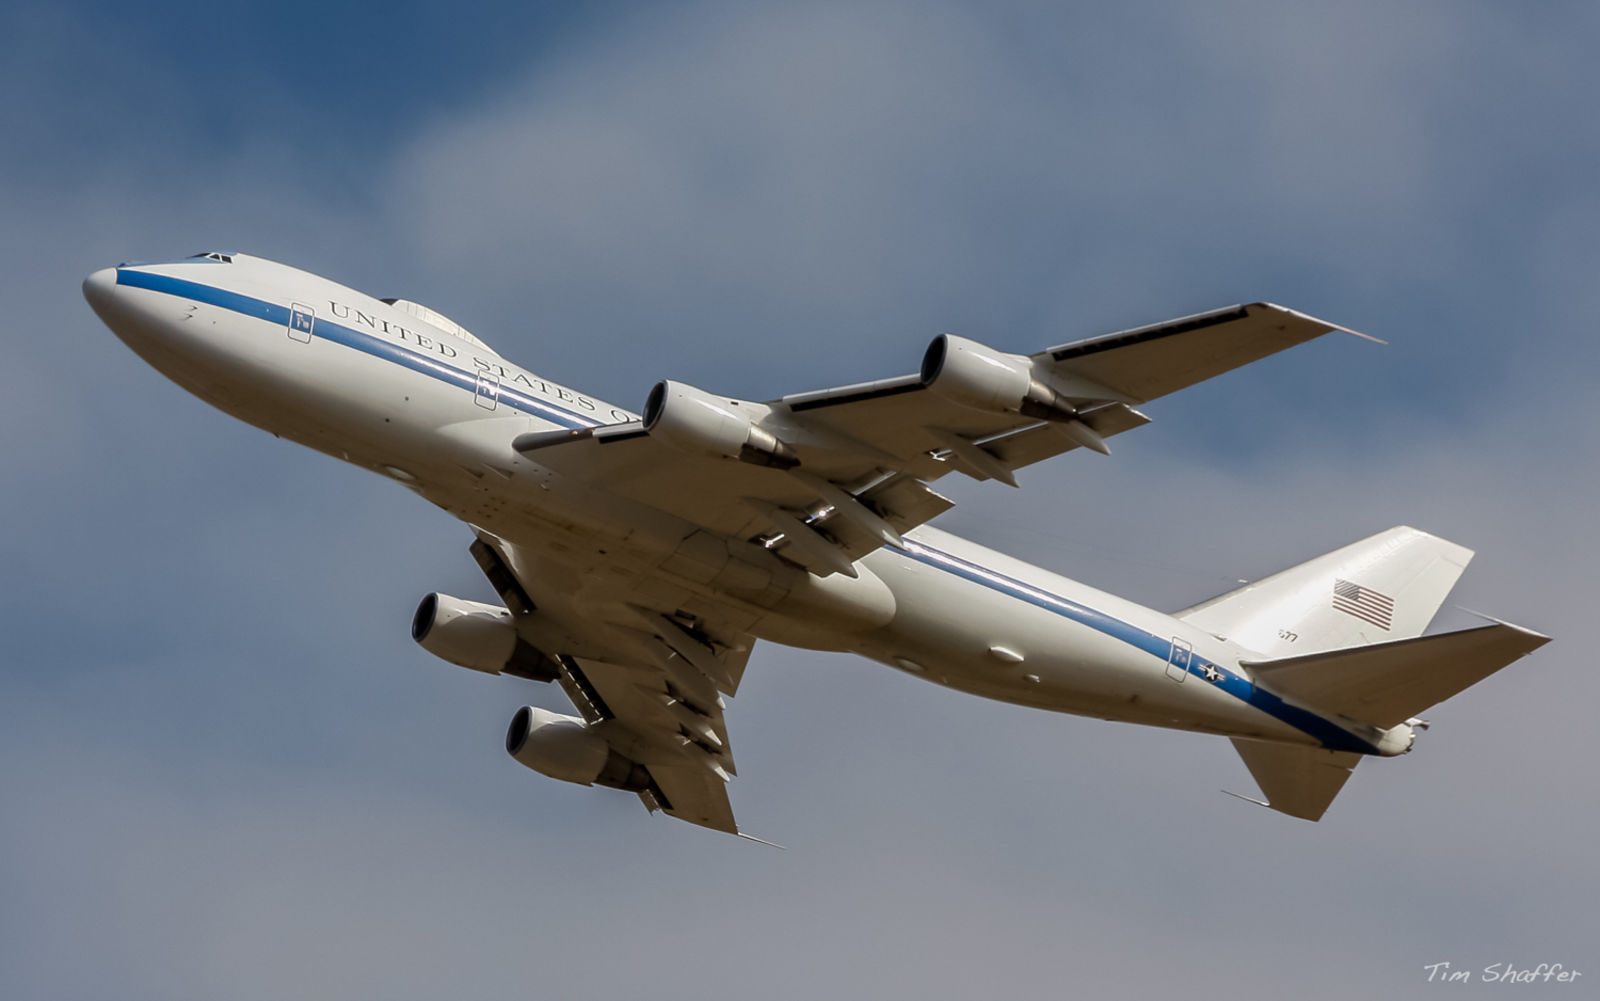 A Boeing E-4B takes off from Dyess Air Force Base in Abilene, Texas in 2012 (Tim Shaffer)